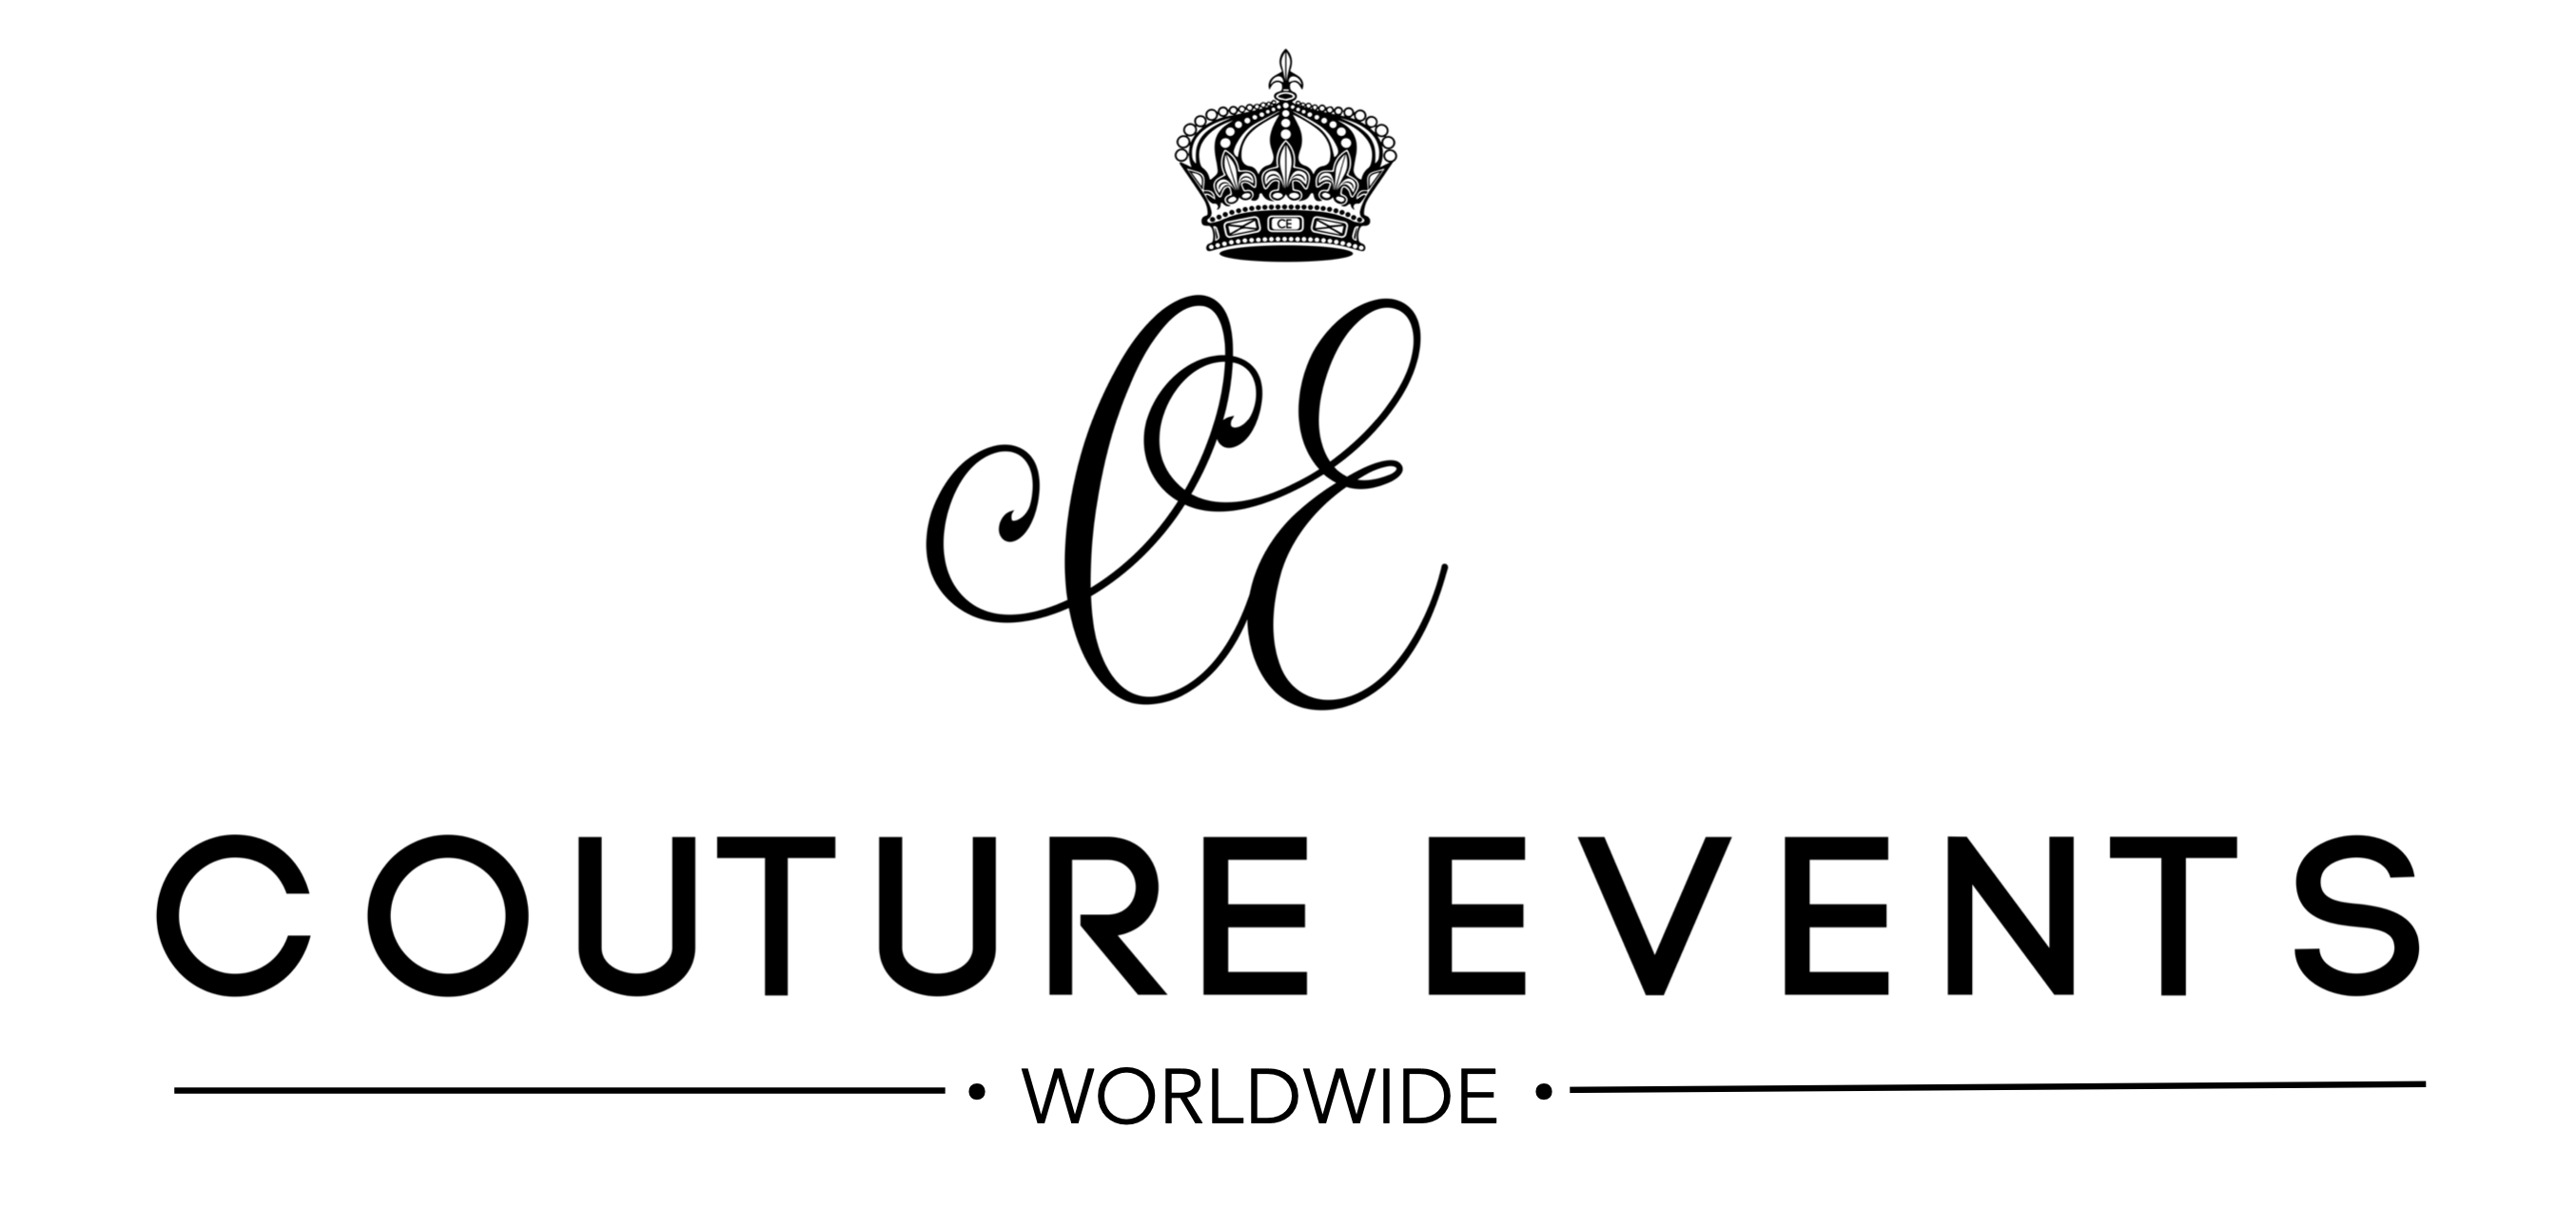 Couture Events Worldwide